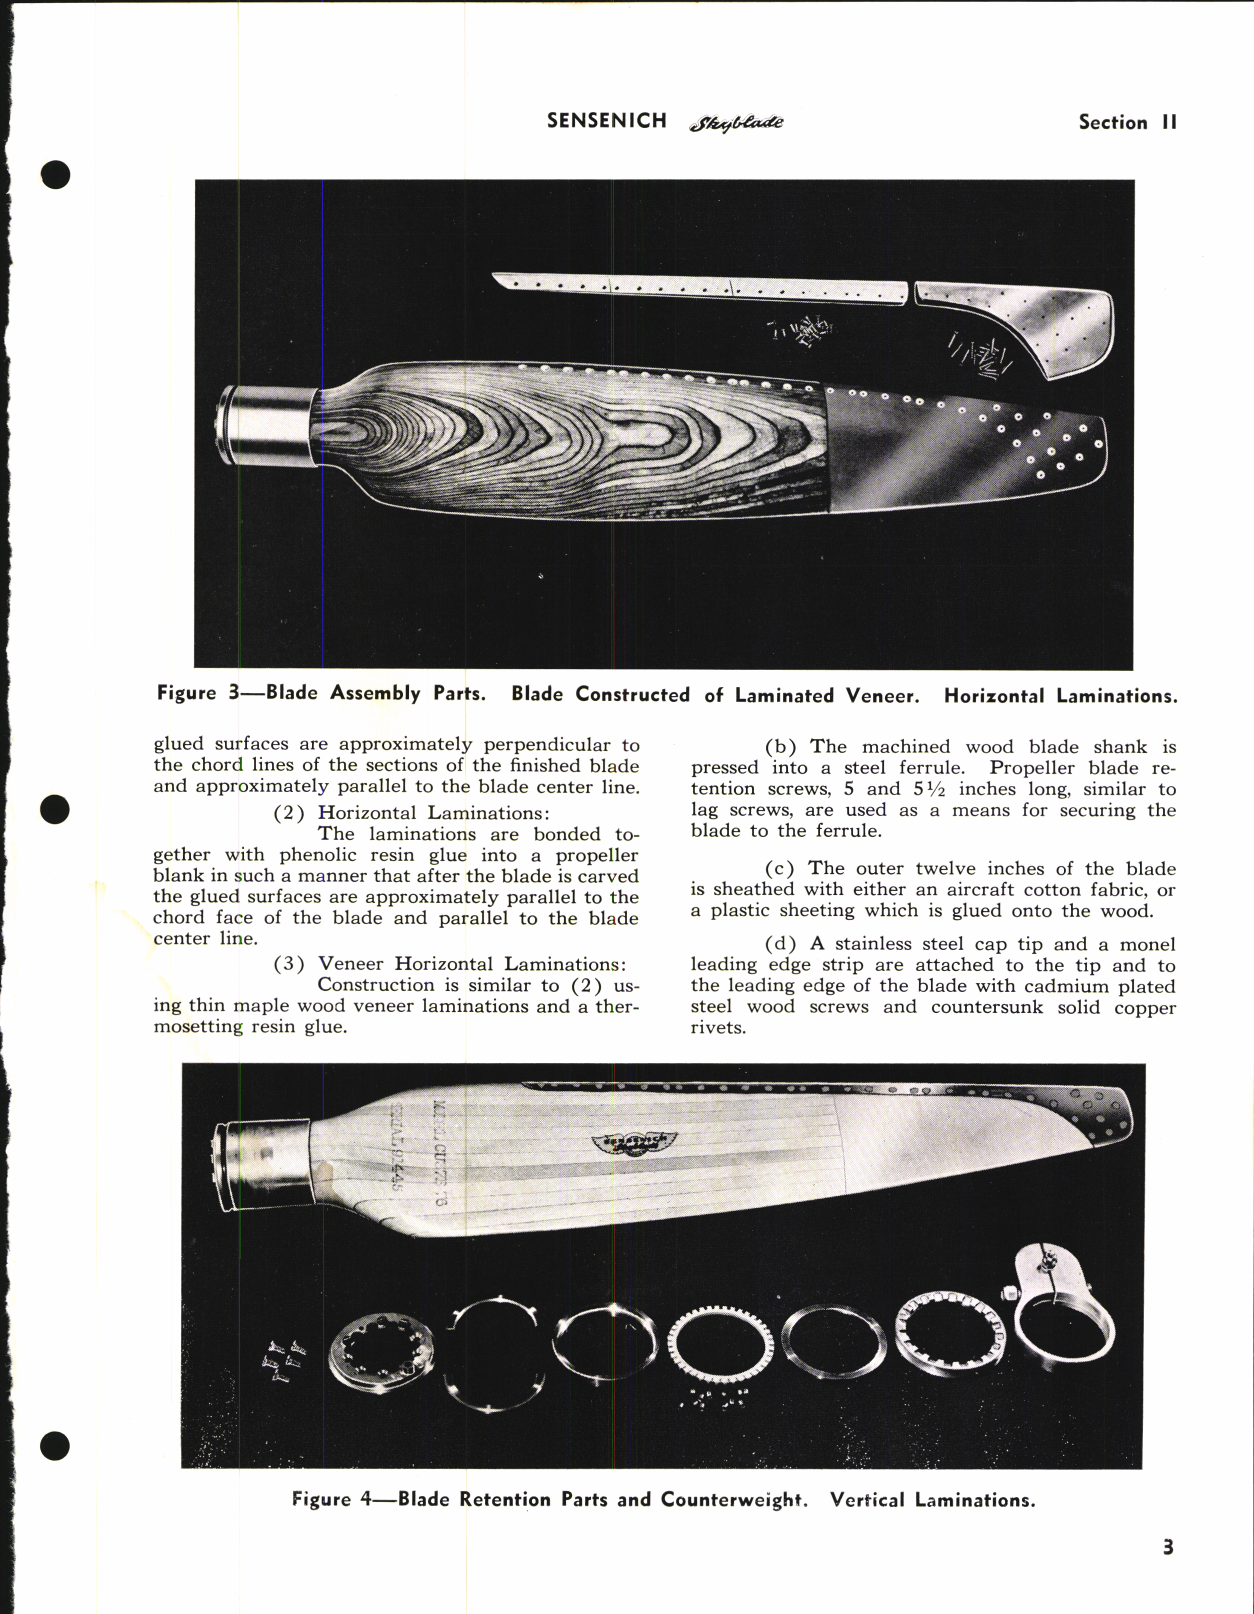 Sample page 7 from AirCorps Library document: Handbook of Instructions and Parts Catalog for Hydraulically Operated Controllable Pitch Propeller